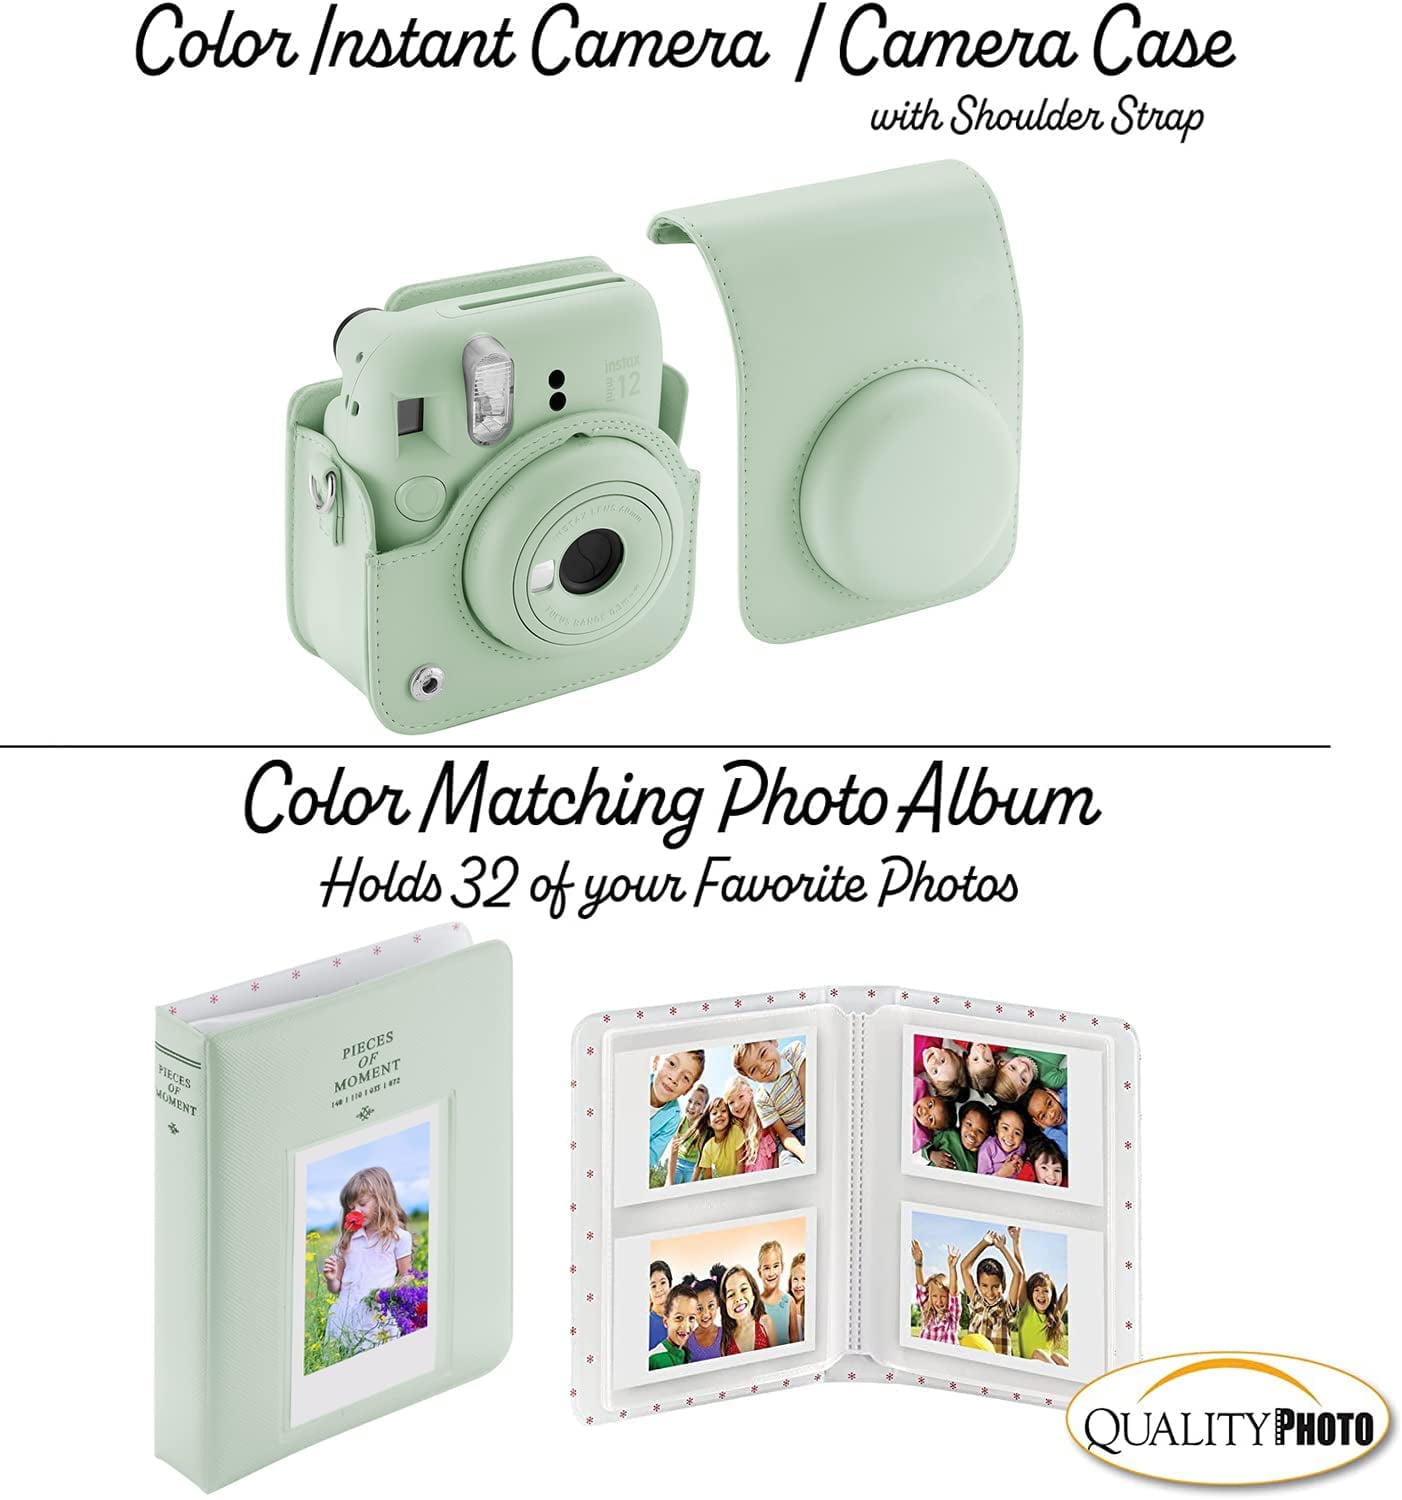 Fujifilm Instax Mini 12 Camera with Fujifilm Instant Mini Film (60 Sheets)  Bundle with Deals Number One Accessories Including Carrying Case, Photo